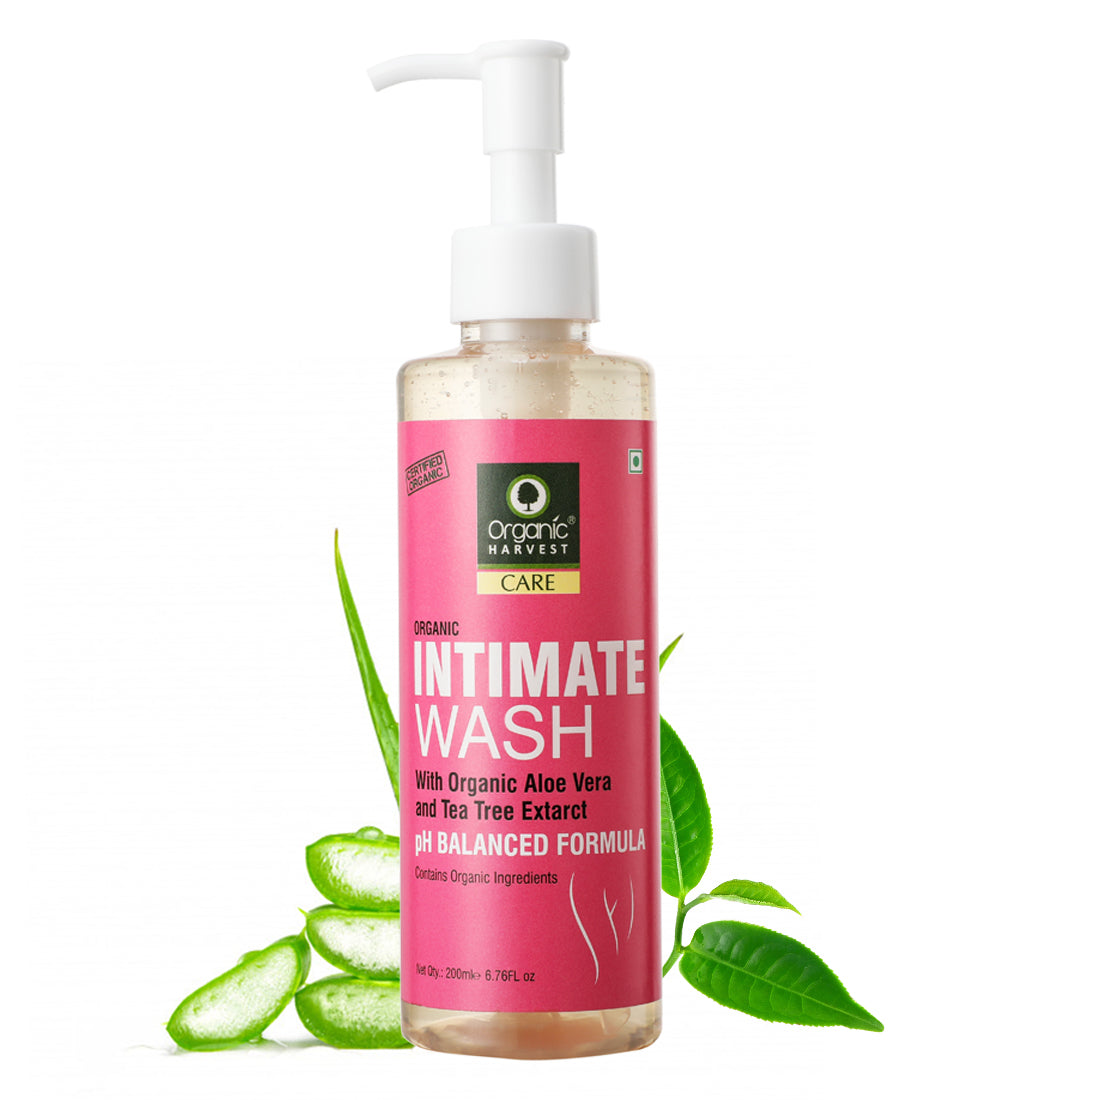 Daily Intimate Feminine Wash, Infused with the Goodness of Organic Aloe Vera and Tea Tree Extracts